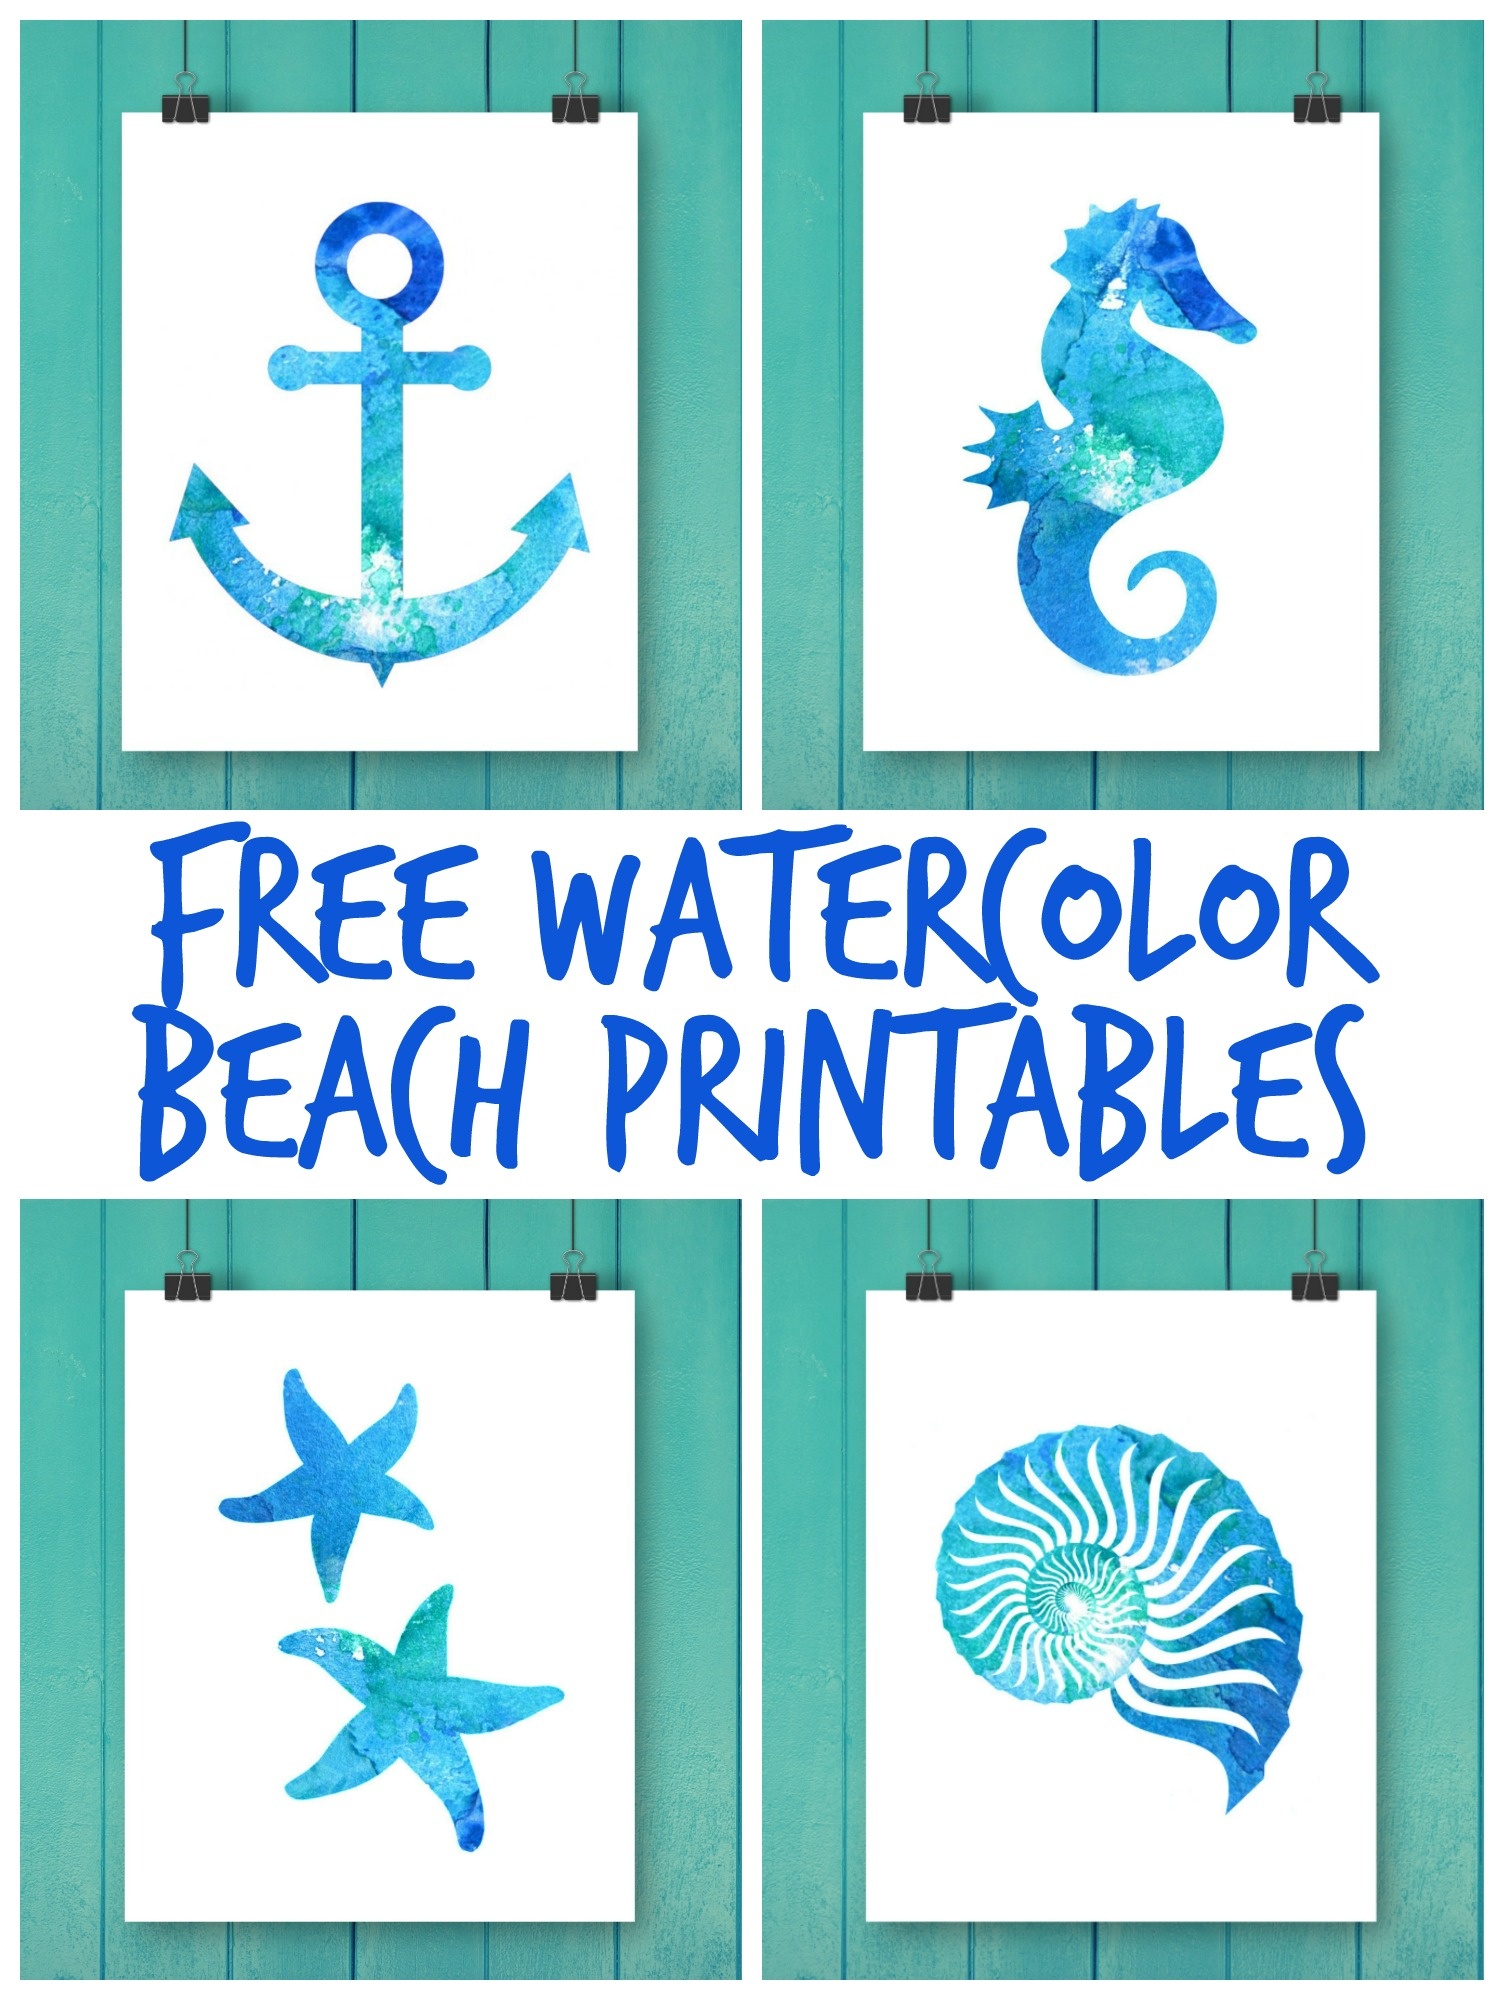 Free Watercolor Beach Printables - Free Printable Beach Pictures